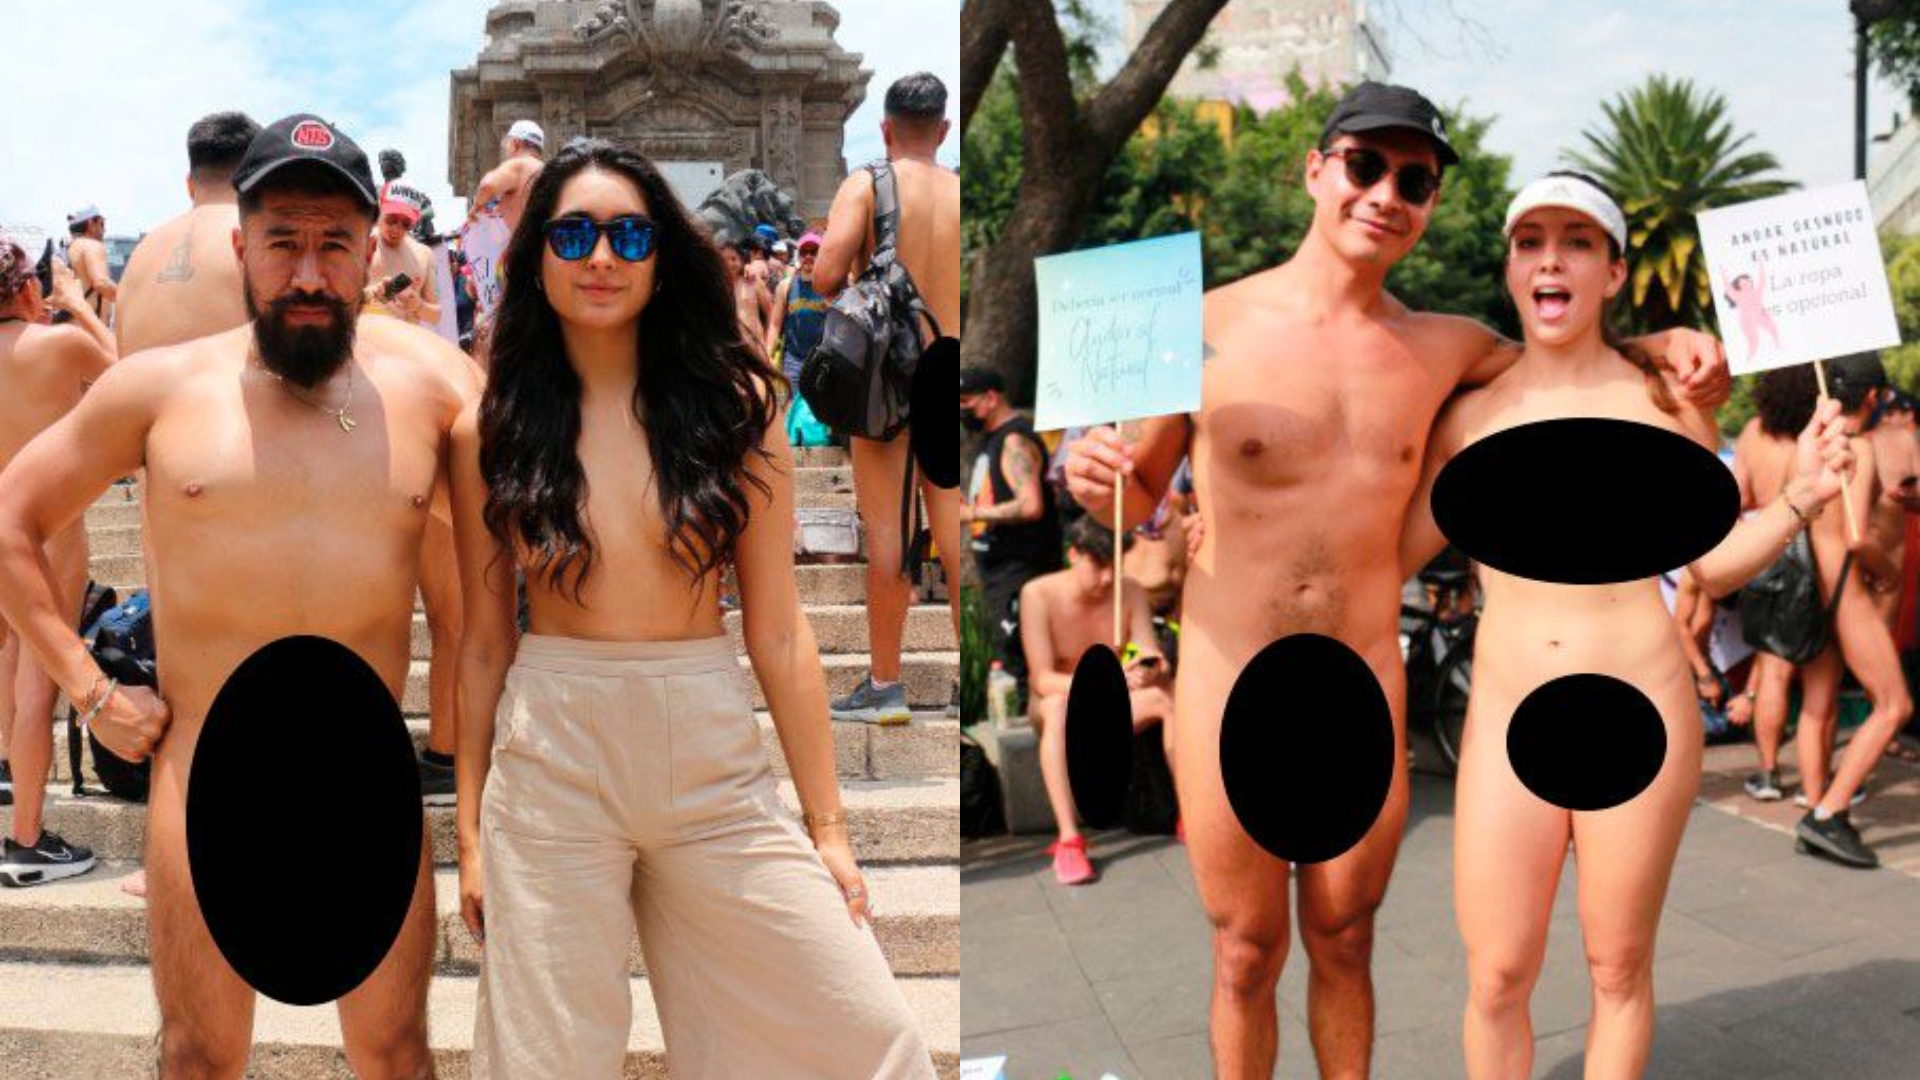 Dozens of people left prejudice behind on Naked Day (Photos: Twitter) 